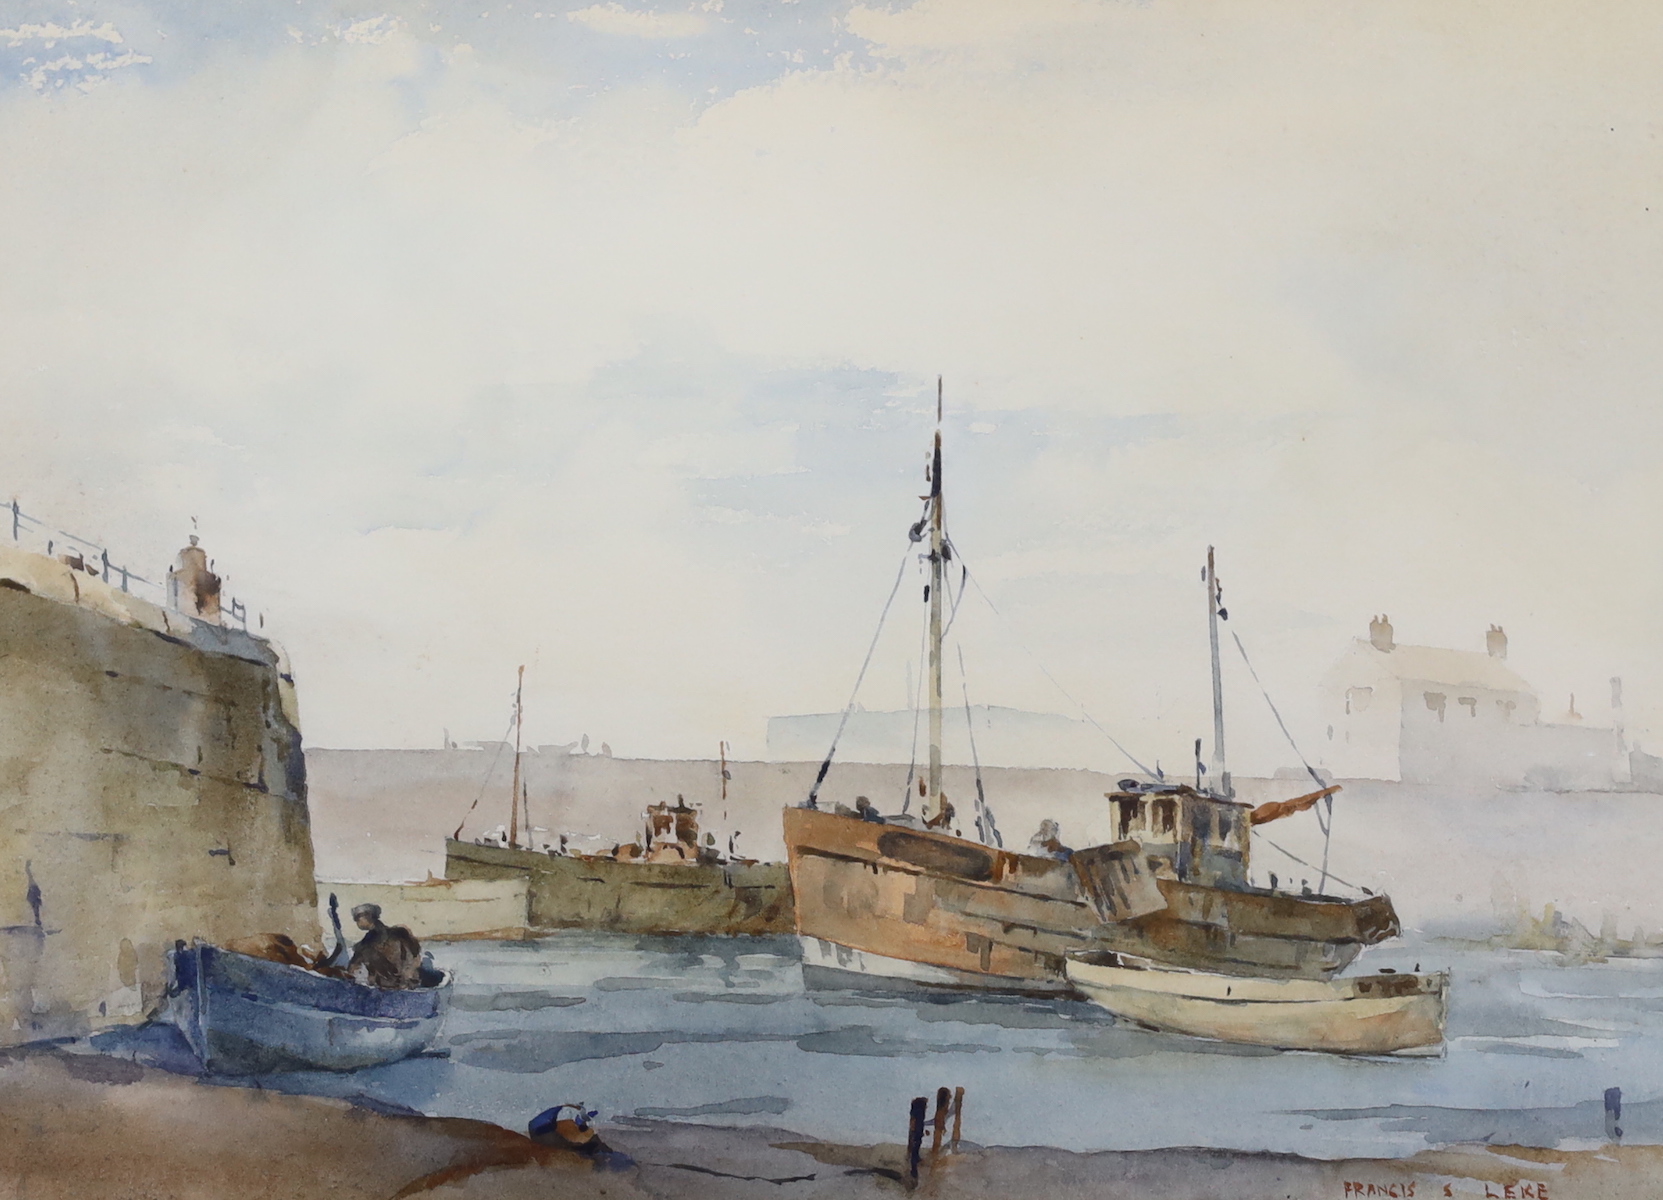 Francis Leke (b.1912), three maritime interest watercolours, Boats and harbour scenes, each signed, 25 x 35cm